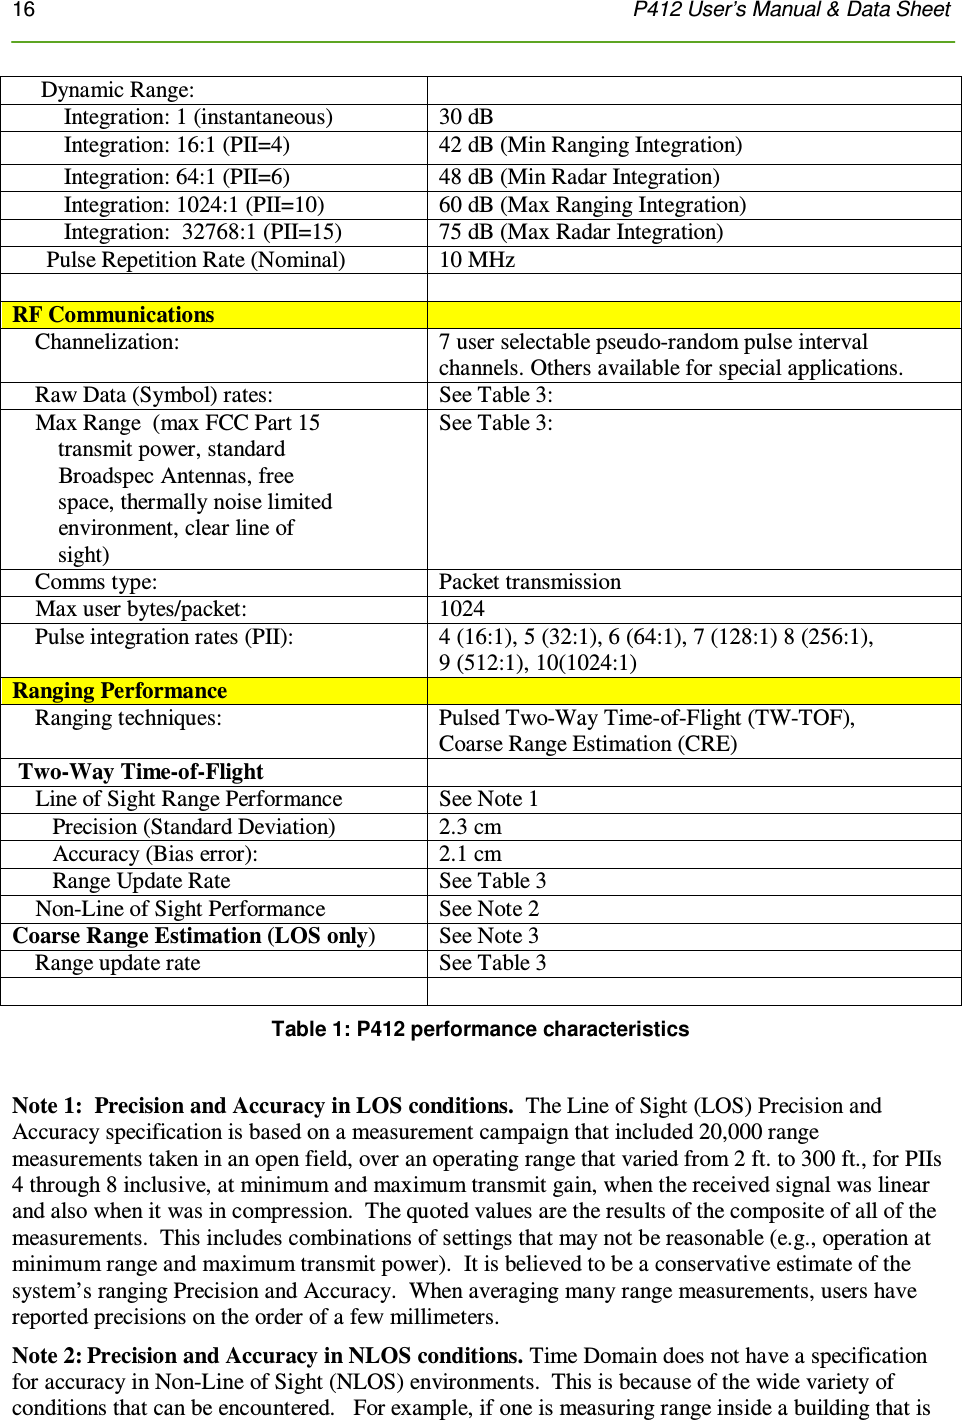 16    P412 User’s Manual &amp; Data Sheet       Dynamic Range:           Integration: 1 (instantaneous)  30 dB          Integration: 16:1 (PII=4) 42 dB (Min Ranging Integration)          Integration: 64:1 (PII=6)   48 dB (Min Radar Integration)          Integration: 1024:1 (PII=10) 60 dB (Max Ranging Integration)          Integration:  32768:1 (PII=15) 75 dB (Max Radar Integration)       Pulse Repetition Rate (Nominal) 10 MHz    RF Communications      Channelization: 7 user selectable pseudo-random pulse interval channels. Others available for special applications.     Raw Data (Symbol) rates: See Table 3:       Max Range  (max FCC Part 15          transmit power, standard          Broadspec Antennas, free          space, thermally noise limited          environment, clear line of          sight) See Table 3:       Comms type: Packet transmission     Max user bytes/packet: 1024     Pulse integration rates (PII): 4 (16:1), 5 (32:1), 6 (64:1), 7 (128:1) 8 (256:1),  9 (512:1), 10(1024:1) Ranging Performance      Ranging techniques: Pulsed Two-Way Time-of-Flight (TW-TOF),  Coarse Range Estimation (CRE)  Two-Way Time-of-Flight      Line of Sight Range Performance See Note 1        Precision (Standard Deviation) 2.3 cm        Accuracy (Bias error): 2.1 cm        Range Update Rate  See Table 3     Non-Line of Sight Performance See Note 2 Coarse Range Estimation (LOS only) See Note 3     Range update rate See Table 3   Table 1: P412 performance characteristics  Note 1:  Precision and Accuracy in LOS conditions.  The Line of Sight (LOS) Precision and Accuracy specification is based on a measurement campaign that included 20,000 range measurements taken in an open field, over an operating range that varied from 2 ft. to 300 ft., for PIIs 4 through 8 inclusive, at minimum and maximum transmit gain, when the received signal was linear and also when it was in compression.  The quoted values are the results of the composite of all of the measurements.  This includes combinations of settings that may not be reasonable (e.g., operation at minimum range and maximum transmit power).  It is believed to be a conservative estimate of the system’s ranging Precision and Accuracy.  When averaging many range measurements, users have reported precisions on the order of a few millimeters. Note 2: Precision and Accuracy in NLOS conditions. Time Domain does not have a specification for accuracy in Non-Line of Sight (NLOS) environments.  This is because of the wide variety of conditions that can be encountered.   For example, if one is measuring range inside a building that is 